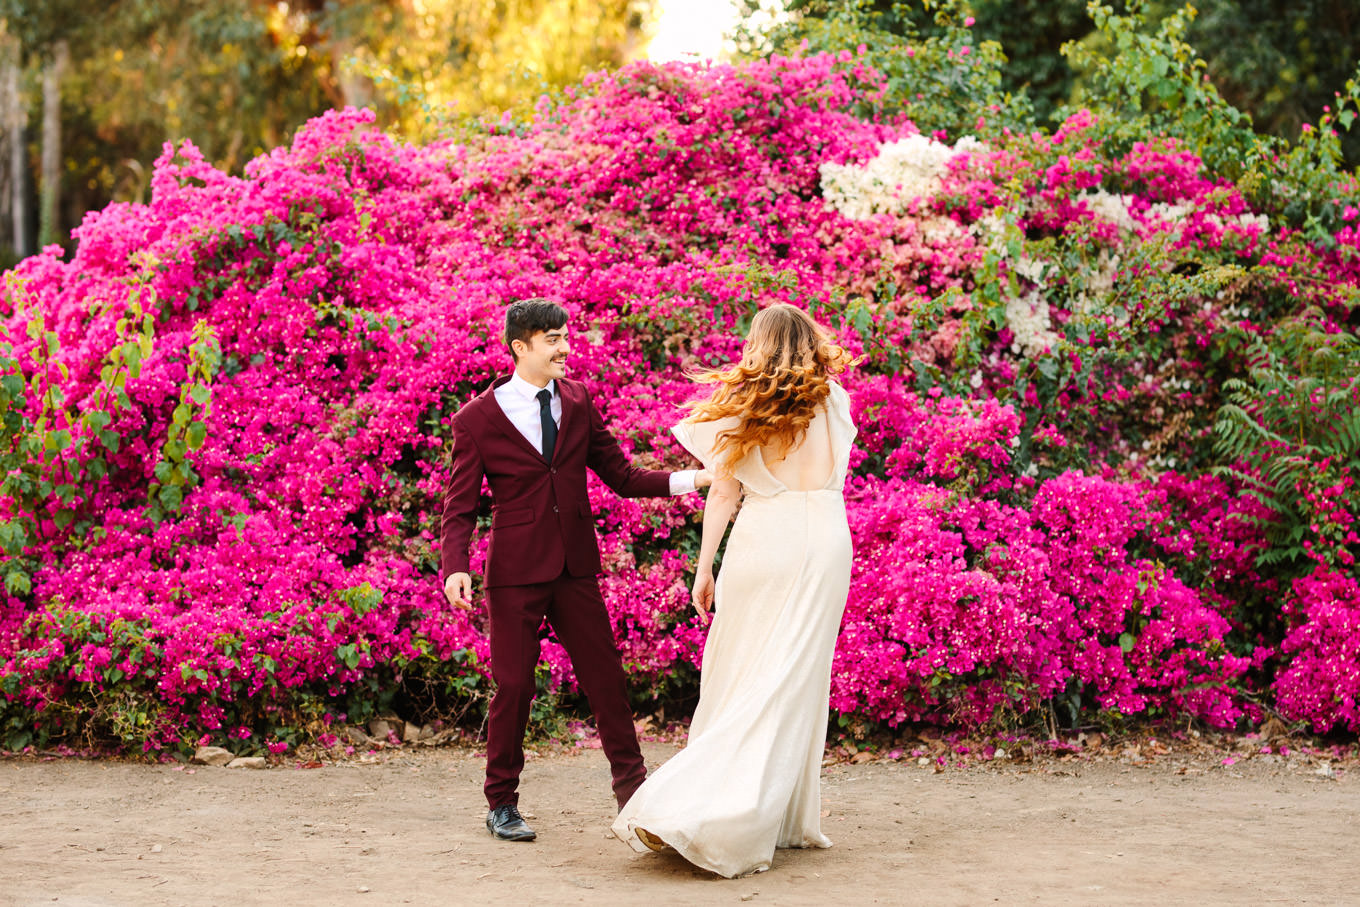 Bride and groom dancing in front of bougainvillea | Los Angeles Arboretum Elopement | Colorful and elevated wedding photography for fun-loving couples in Southern California | #LosAngelesElopement #elopement #LAarboretum #LAskyline #elopementphotos   Source: Mary Costa Photography | Los Angeles 